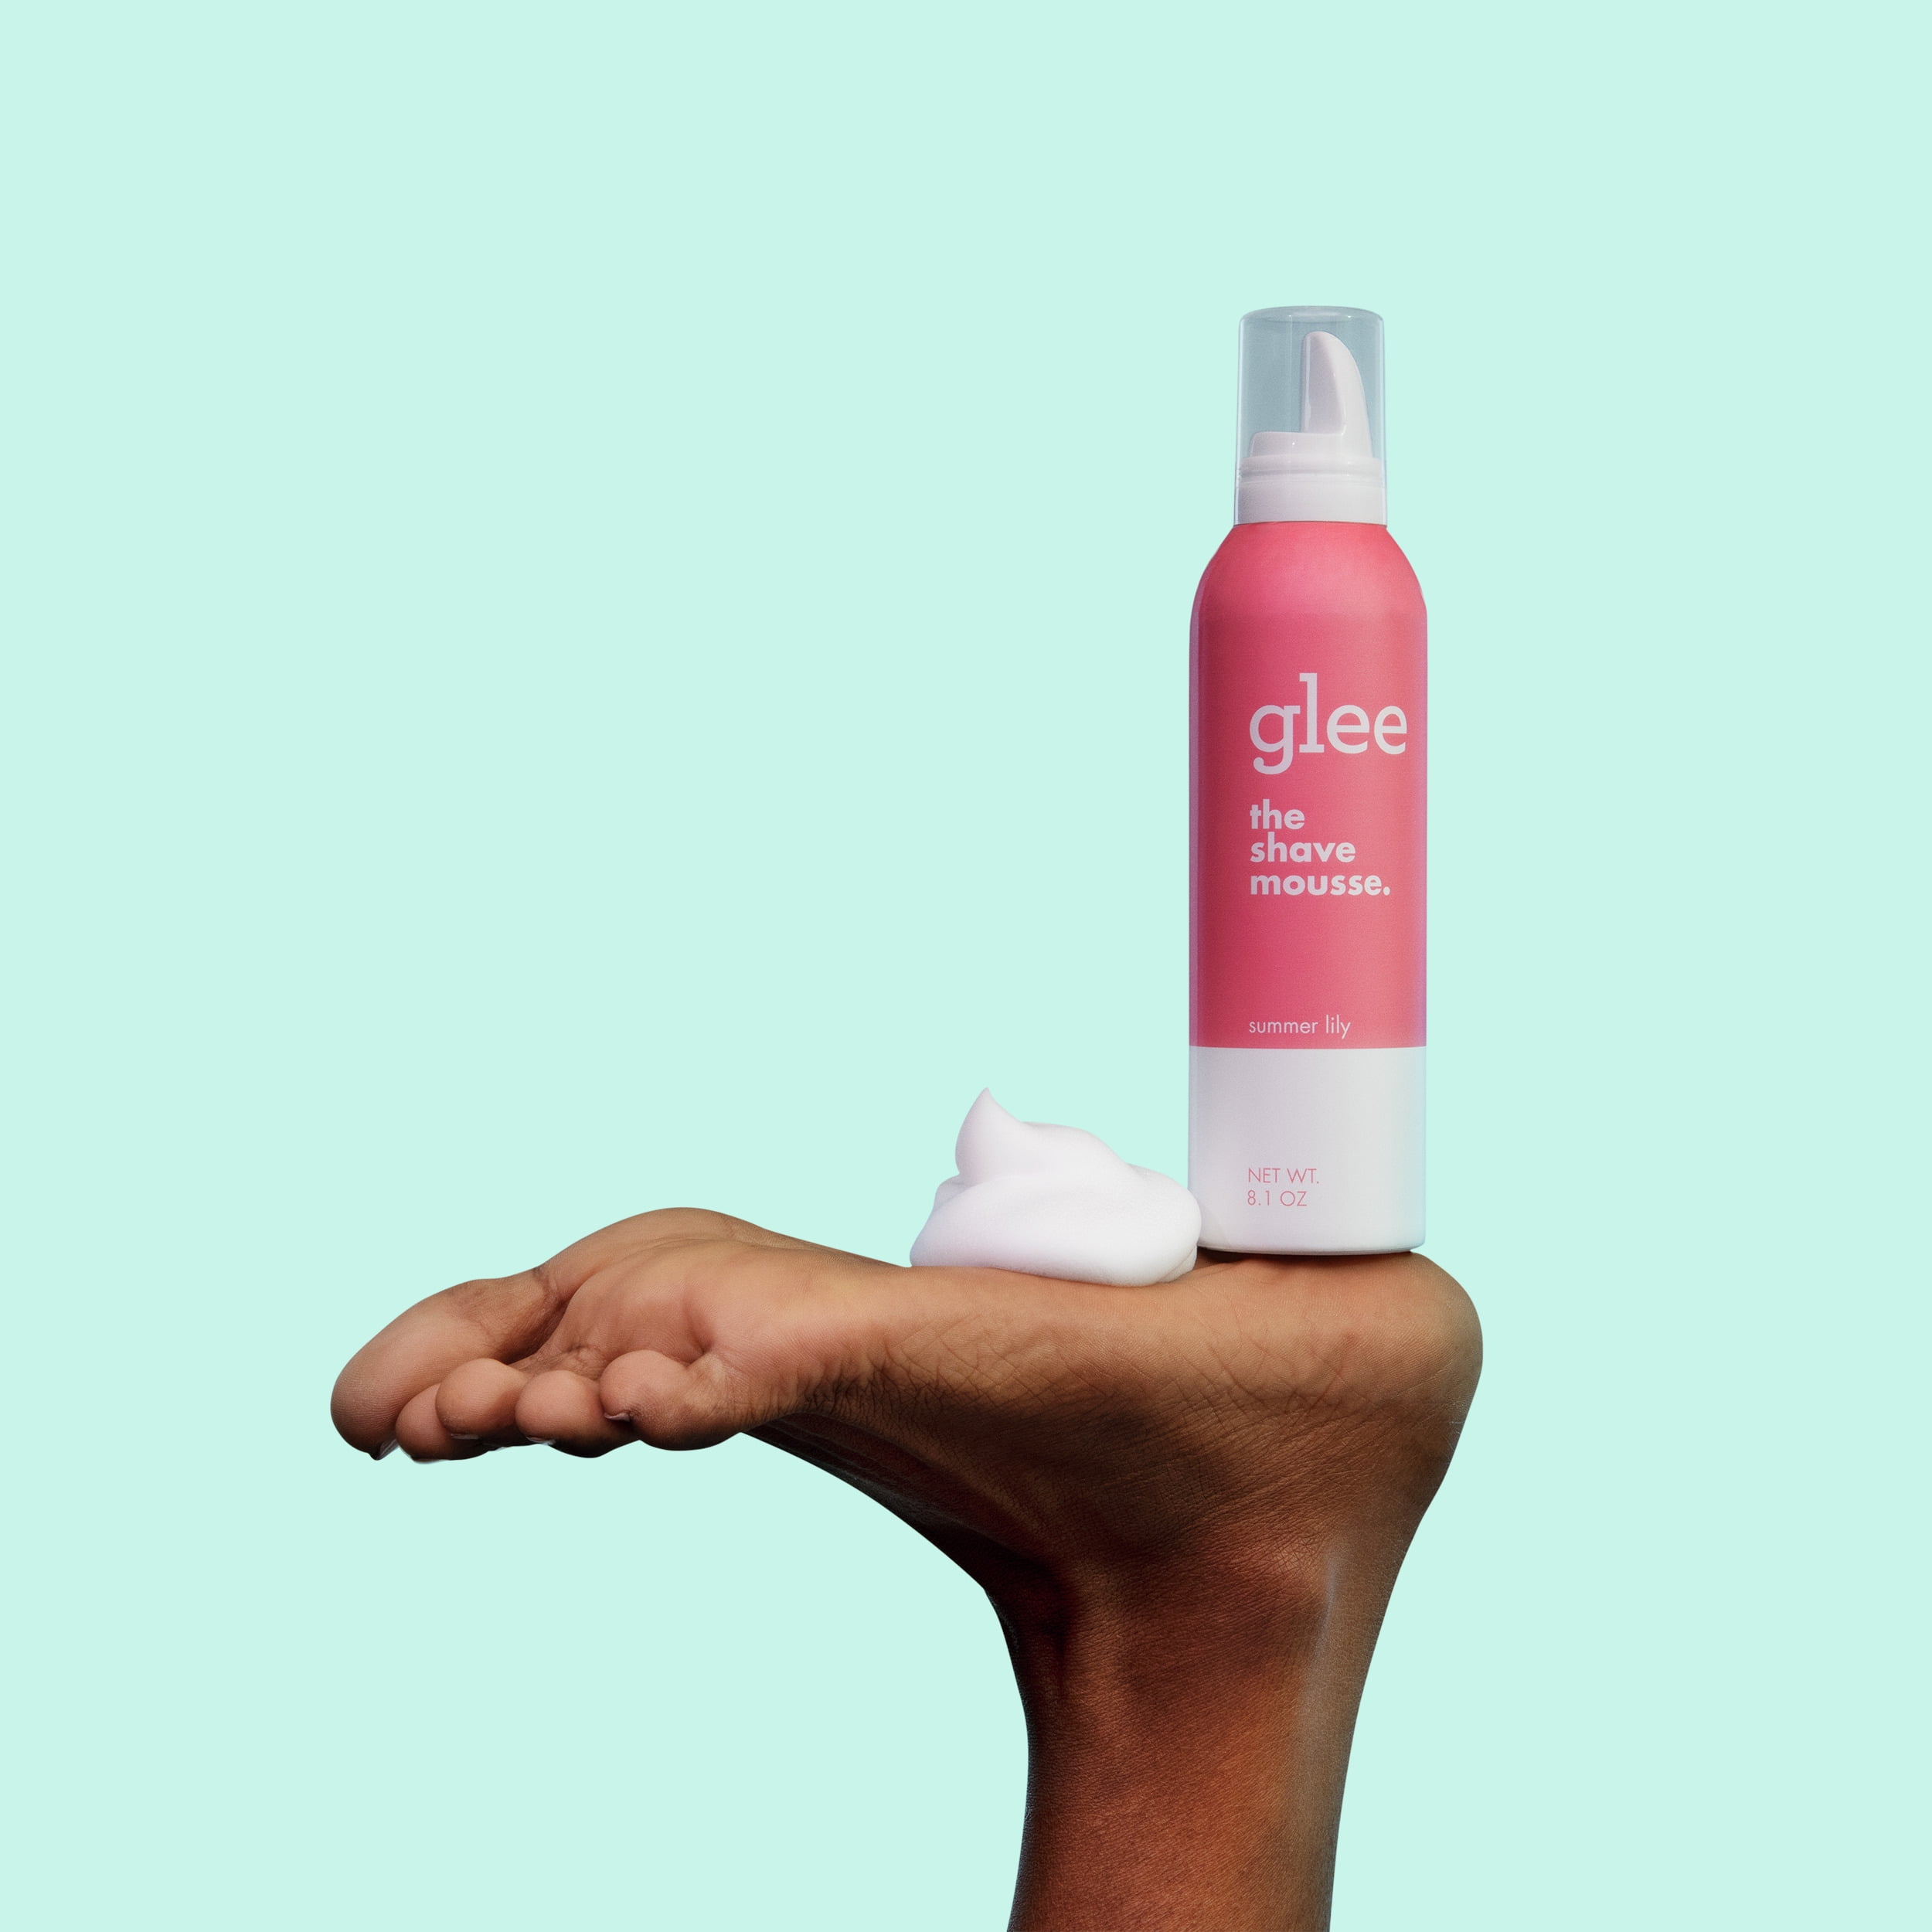 Glee Summer Lily Shave Mousse for Women, 8.1 Ounces - Walmart.com